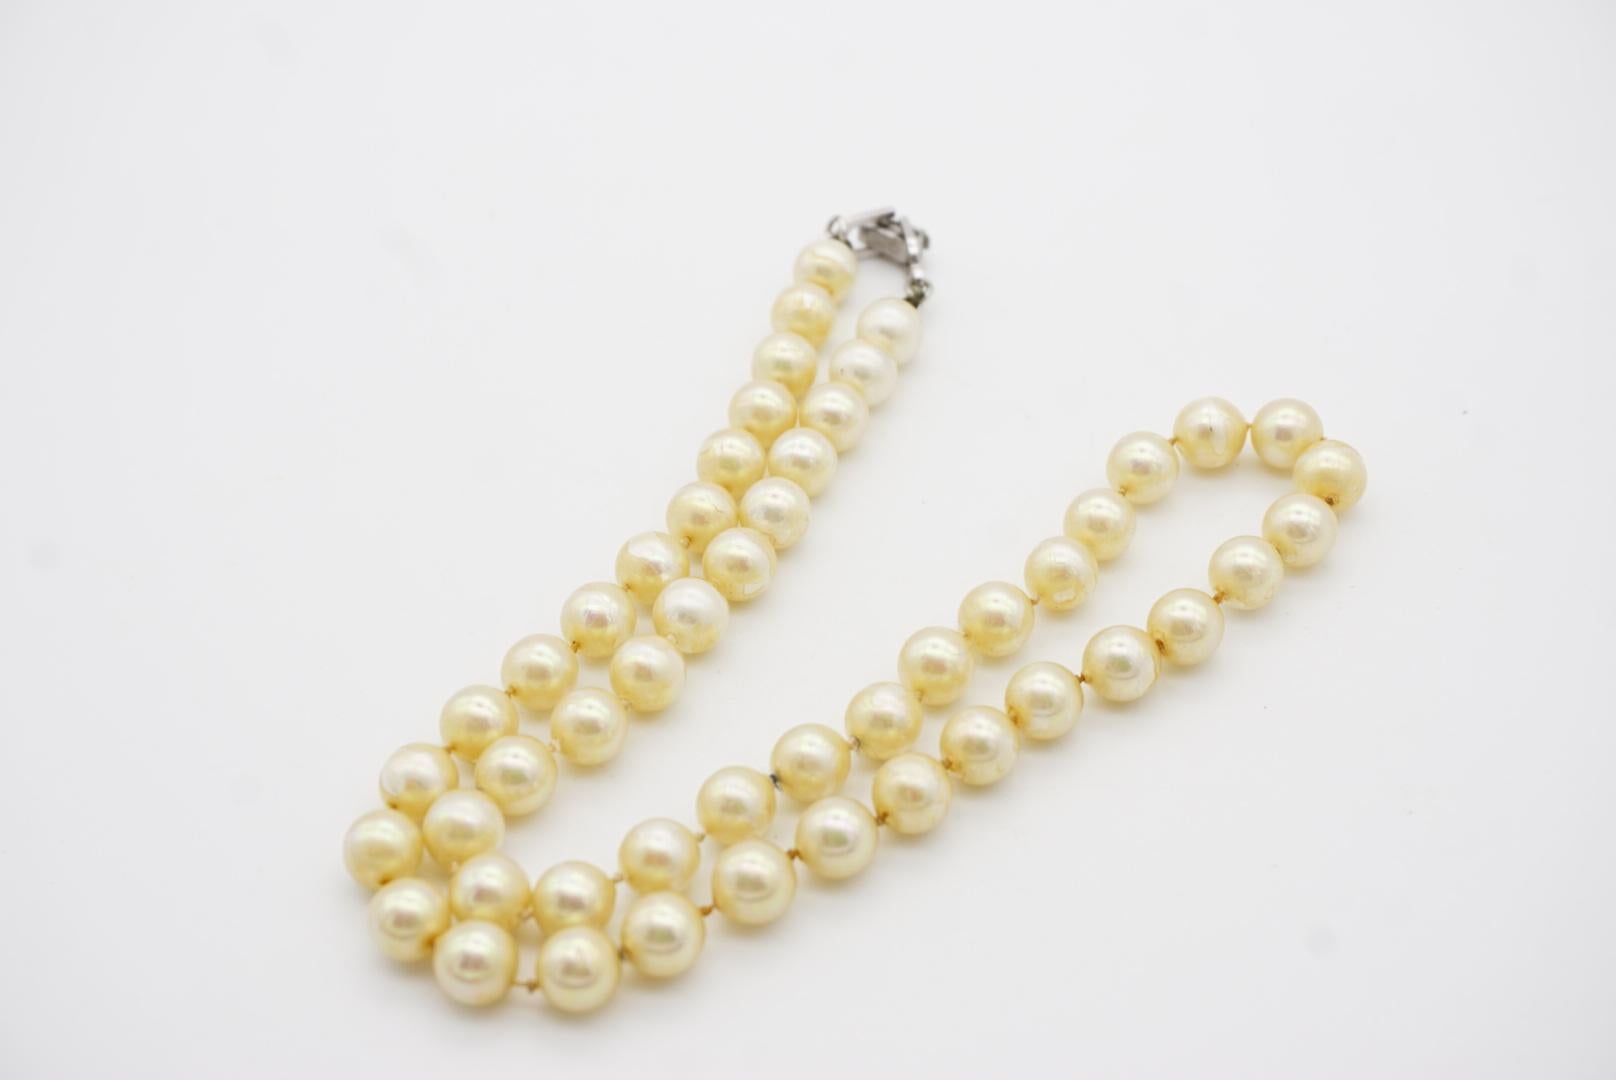 Christian Dior Vintage 1980s White Round Pearls Set Silver Necklace Earrings For Sale 5